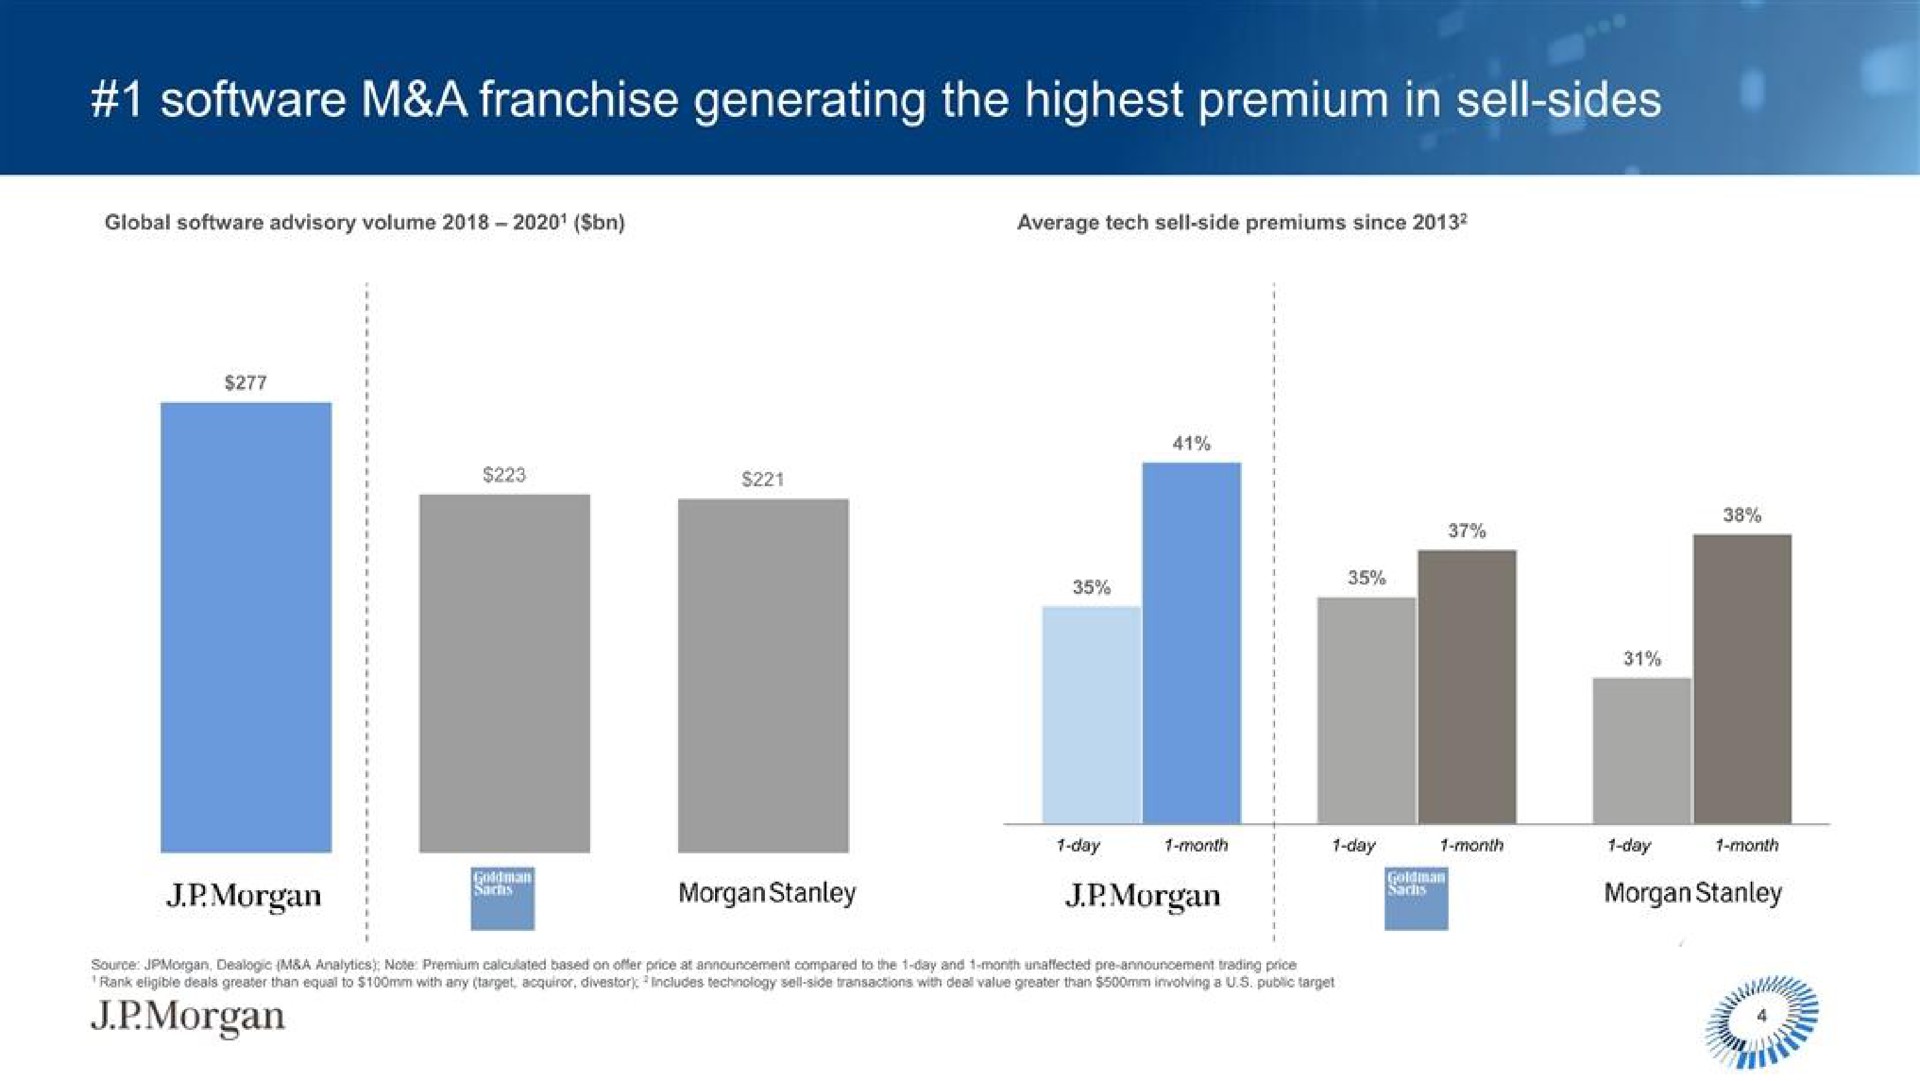 a franchise generating the highest premium in sell sides morgan | J.P.Morgan